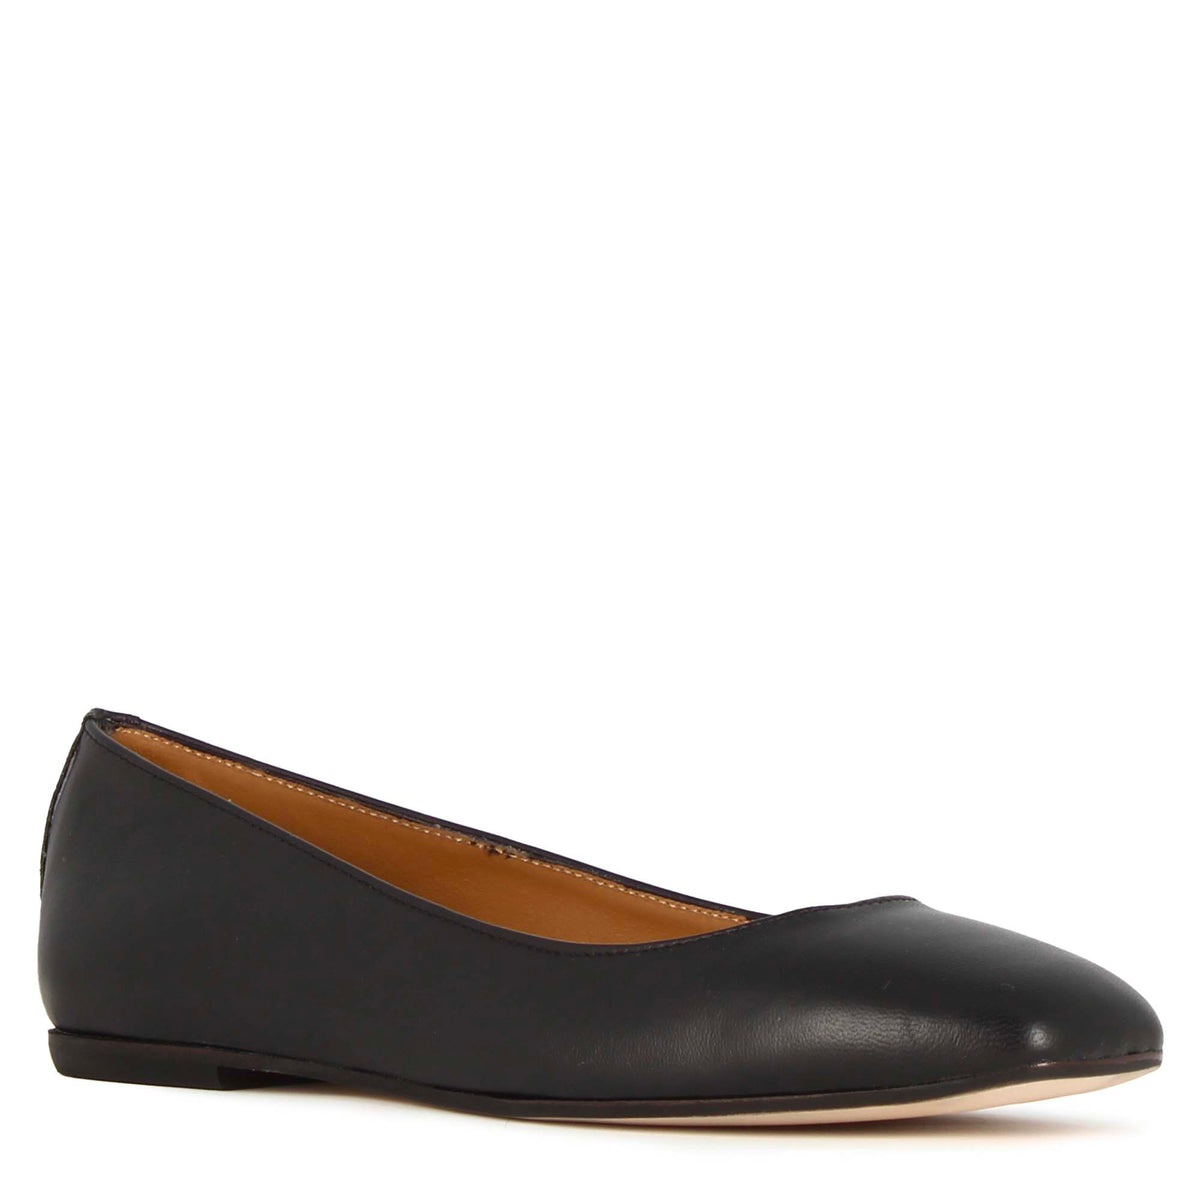 Handmade women's casual ballet flat in black smooth leather